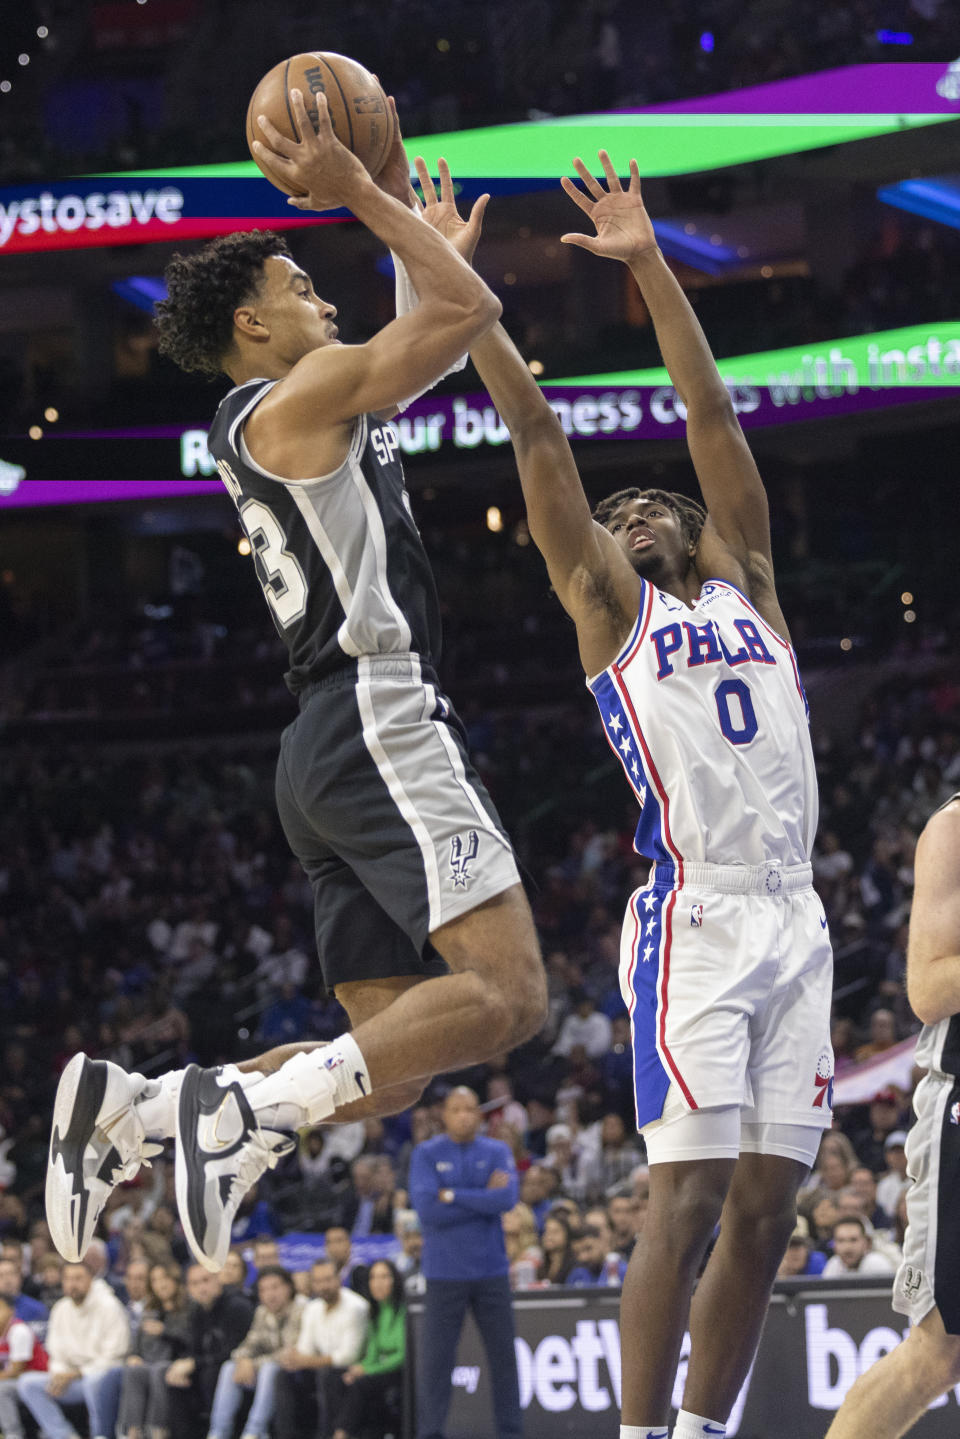 San Antonio Spurs guard Tre Jones (33) takes a shot over Philadelphia 76ers guard Tyrese Maxey (0) in the first half on an NBA basketball game, Saturday, Oct. 22, 2022, in Philadelphia. (AP Photo/Laurence Kesterson)